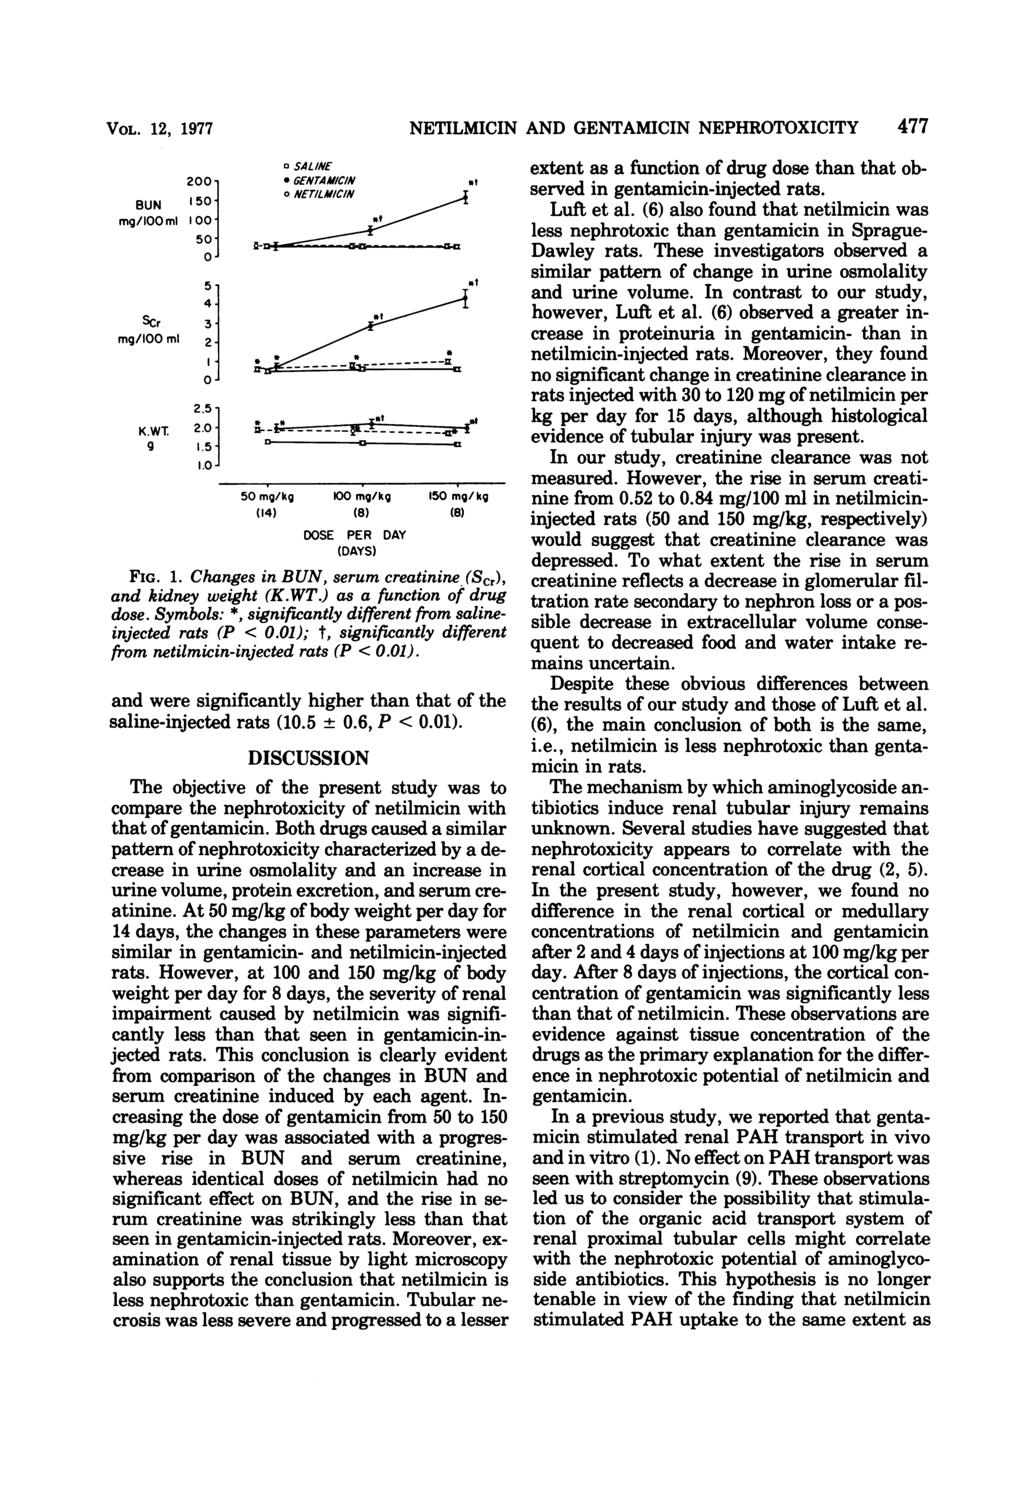 VOL. 12, 1977 2001 BUN 1501 mg/loom) 00], 50j a SAL/NE * GENTAMICIN o NErILM/C/N *t NETILMICIN AND GENTAMICIN NEPHROTOXICITY ftt extent as a function of drug dose than that observed in